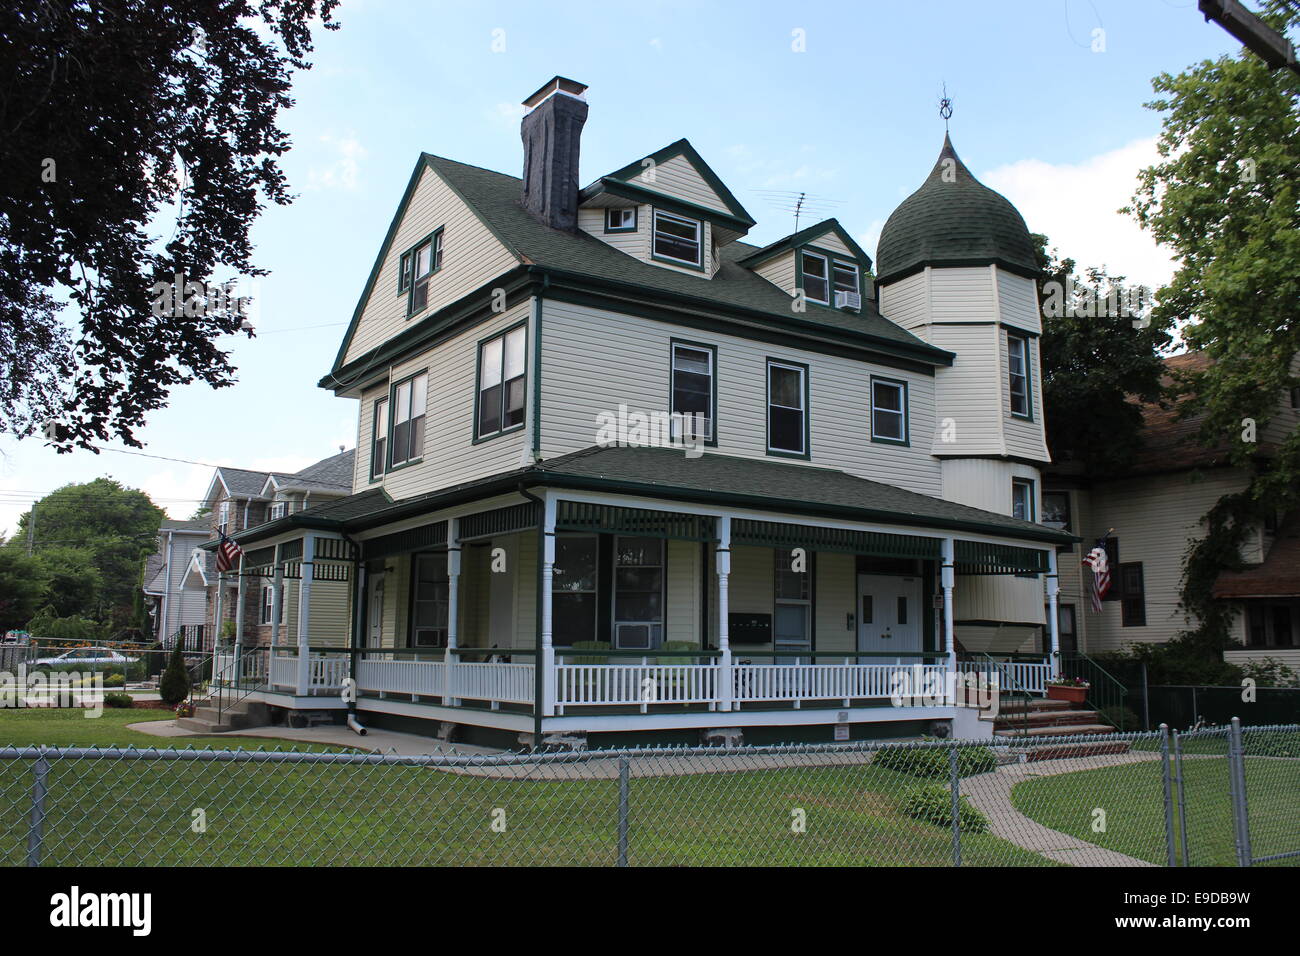 Queen Anne House, built in the 1880s in Clifton, Staten Island, New York Stock Photo